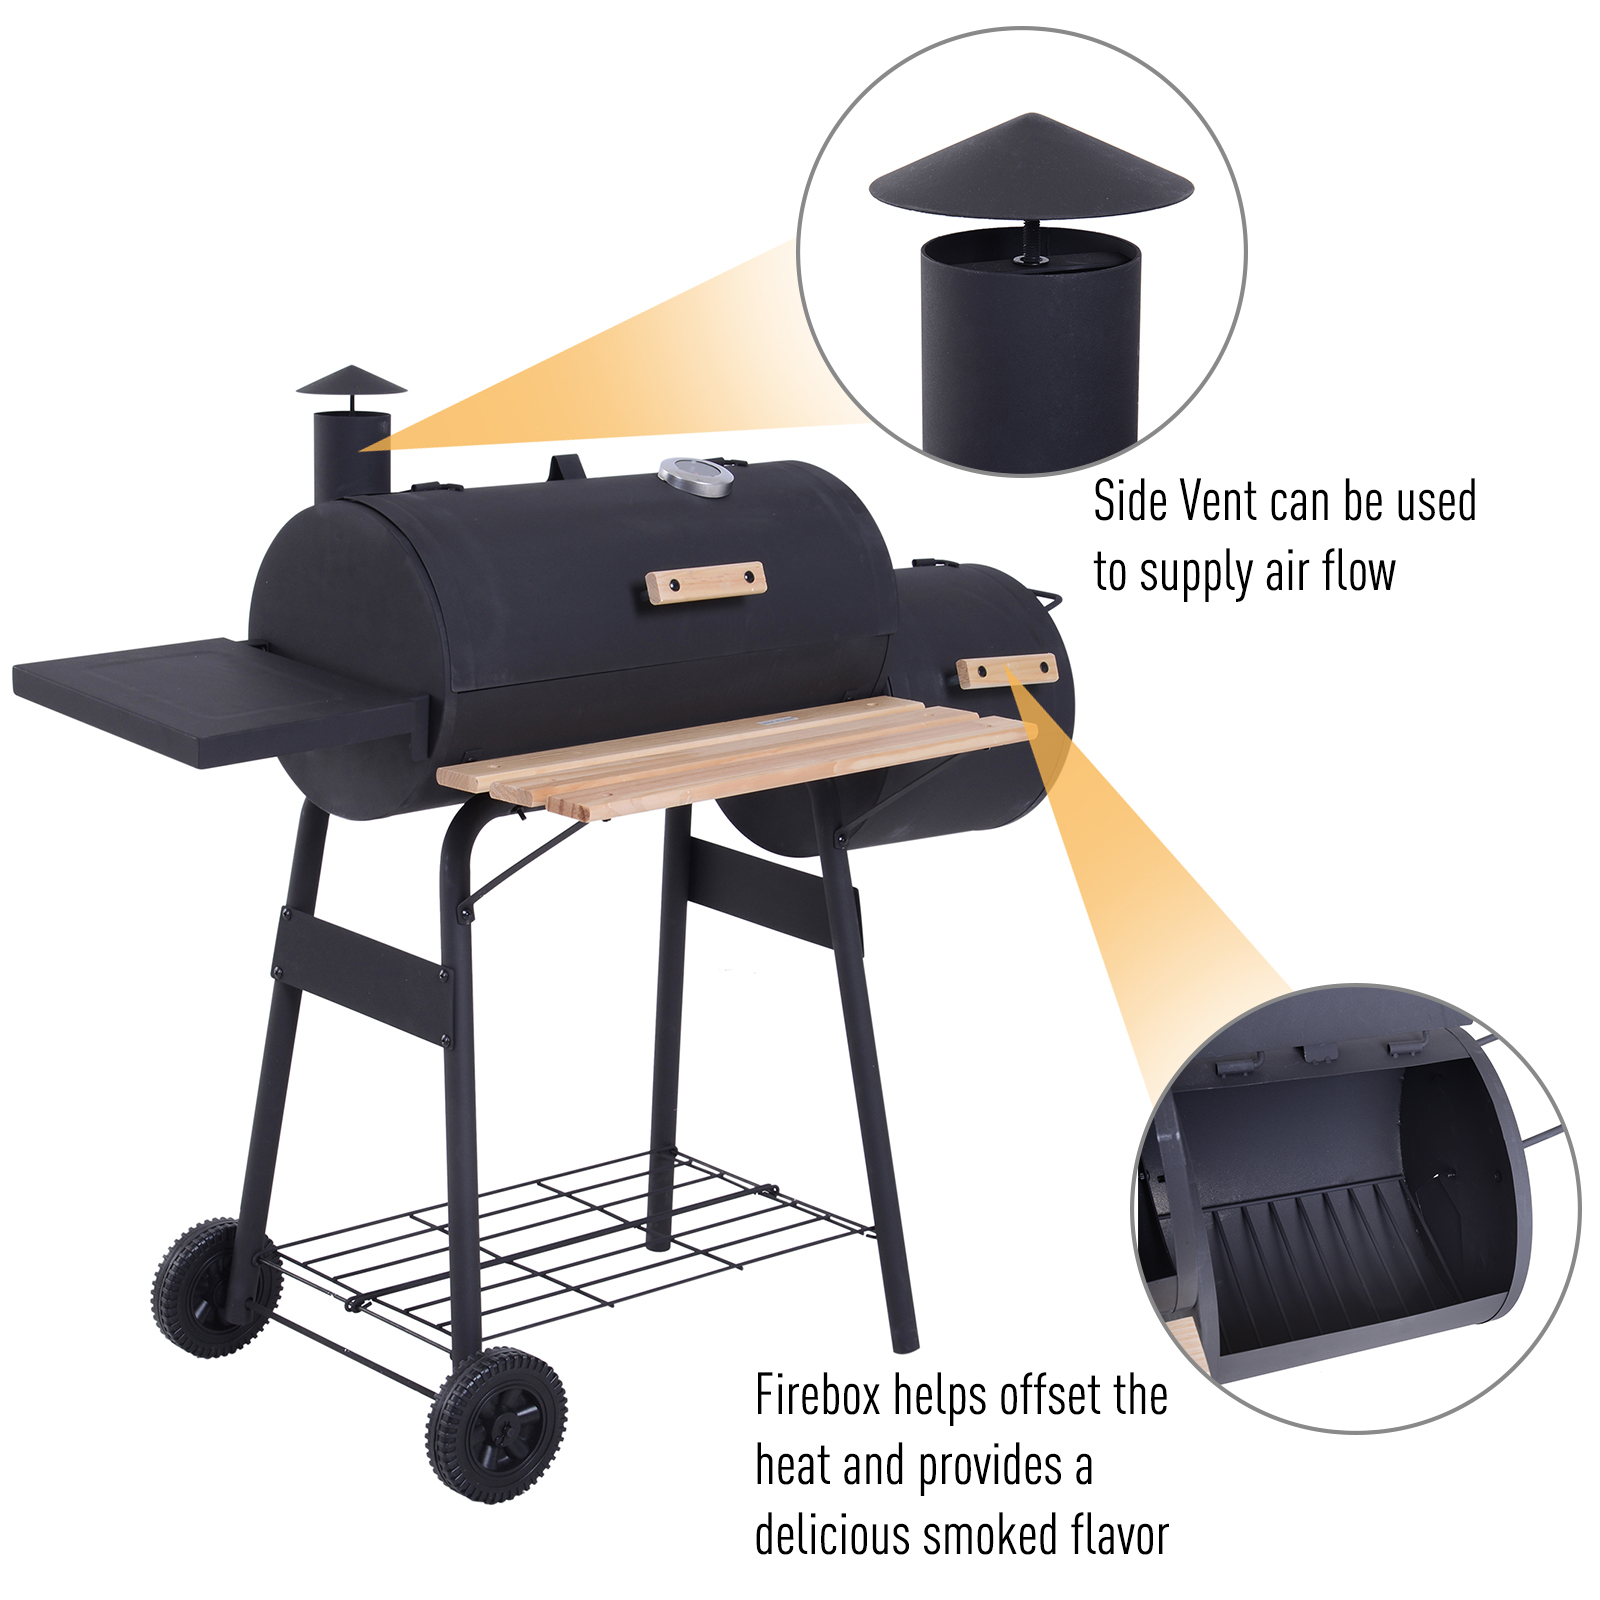 Outsunny 48" Steel Portable Backyard Charcoal BBQ Grill and Offset Smoker Combo - image 4 of 9